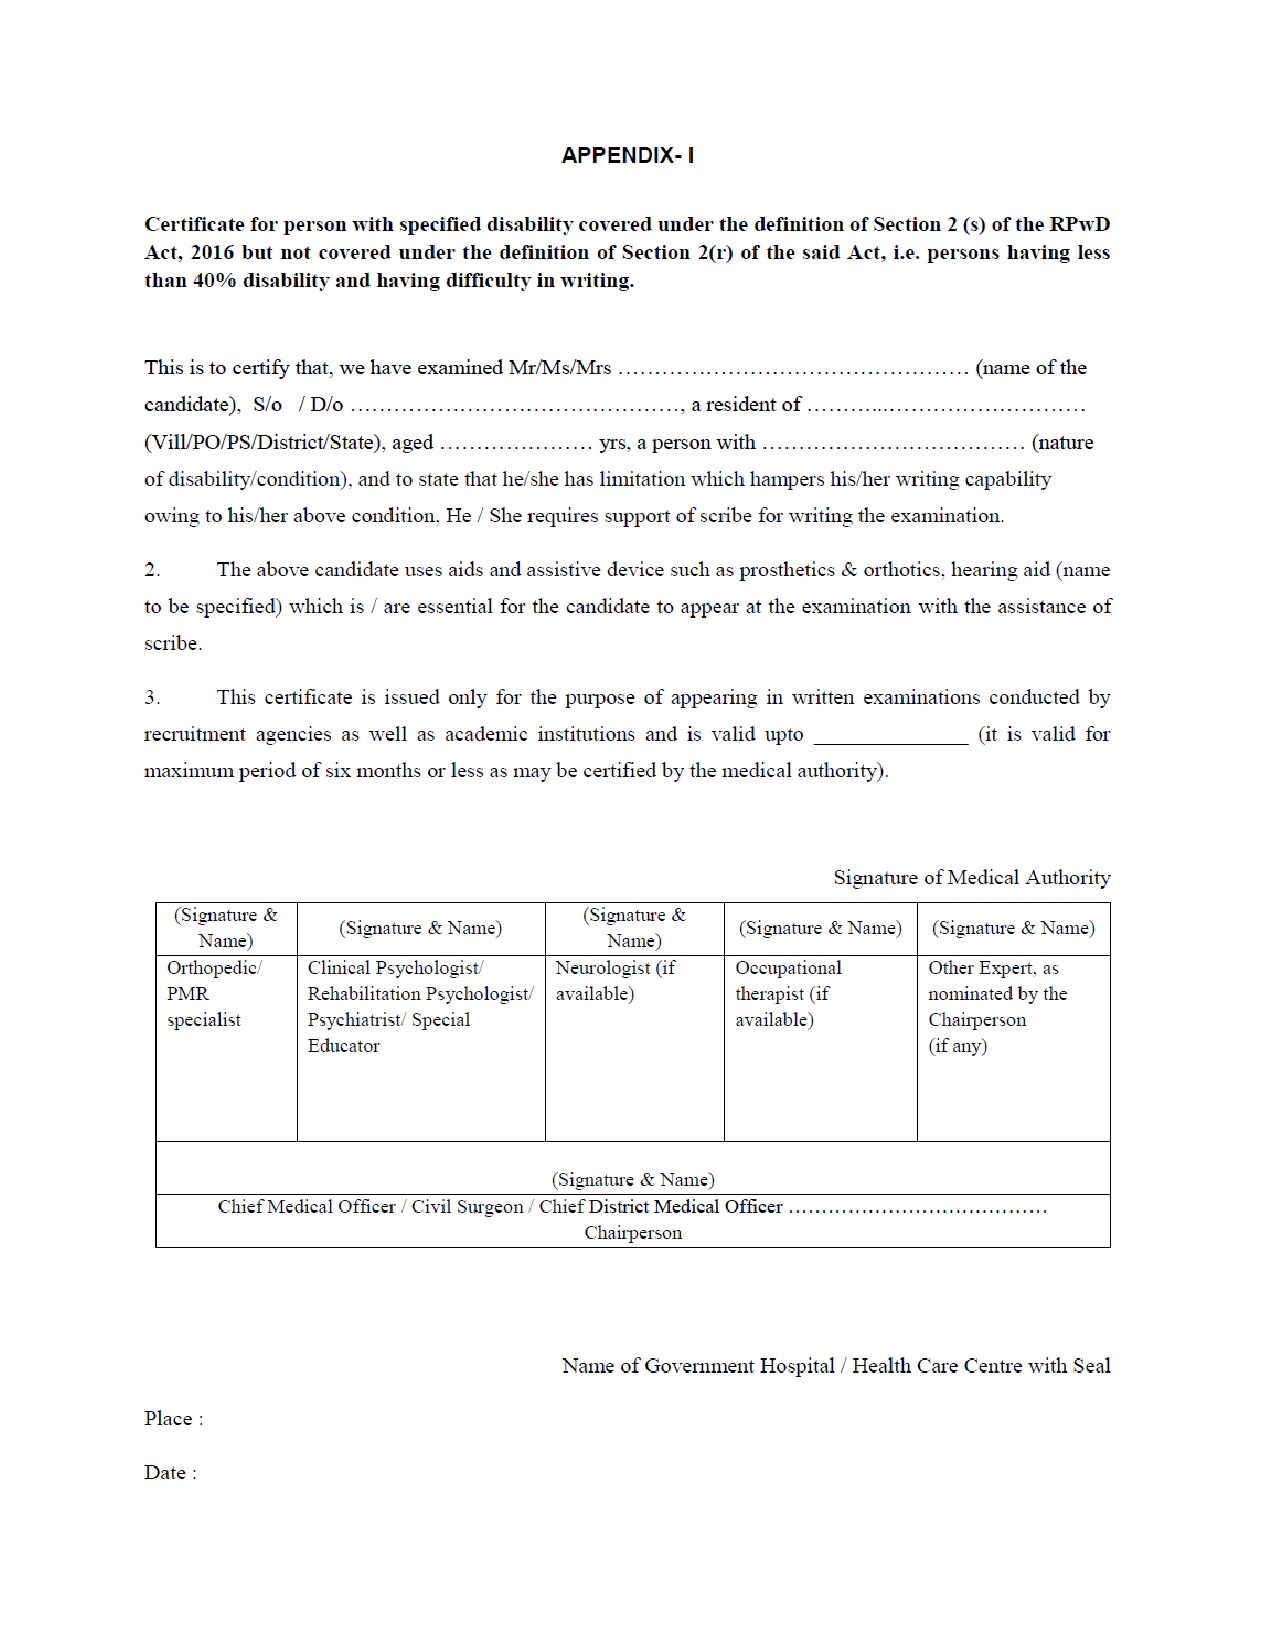 Class III Assistants in New India Assurance Company - Notification Image 32